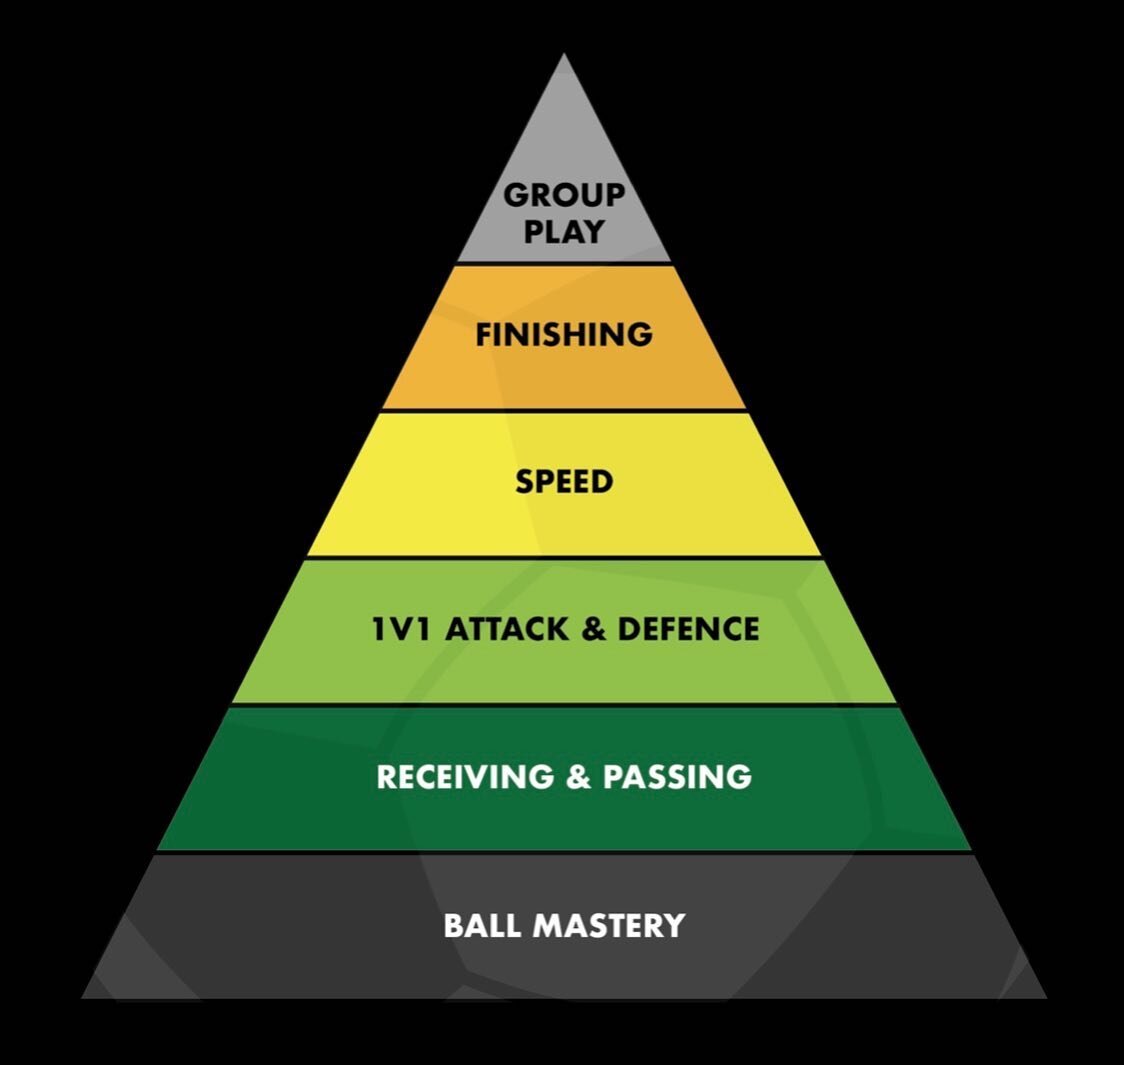 OUR CURRICULUM

BALL MASTERY: The Foundation
The touch, control and confidence that affects every other part of the pyramid. This teaches hard work &amp; self-responsibility.

RECEIVING &amp; PASSING: The Teamwork Skills
Without them little is possib